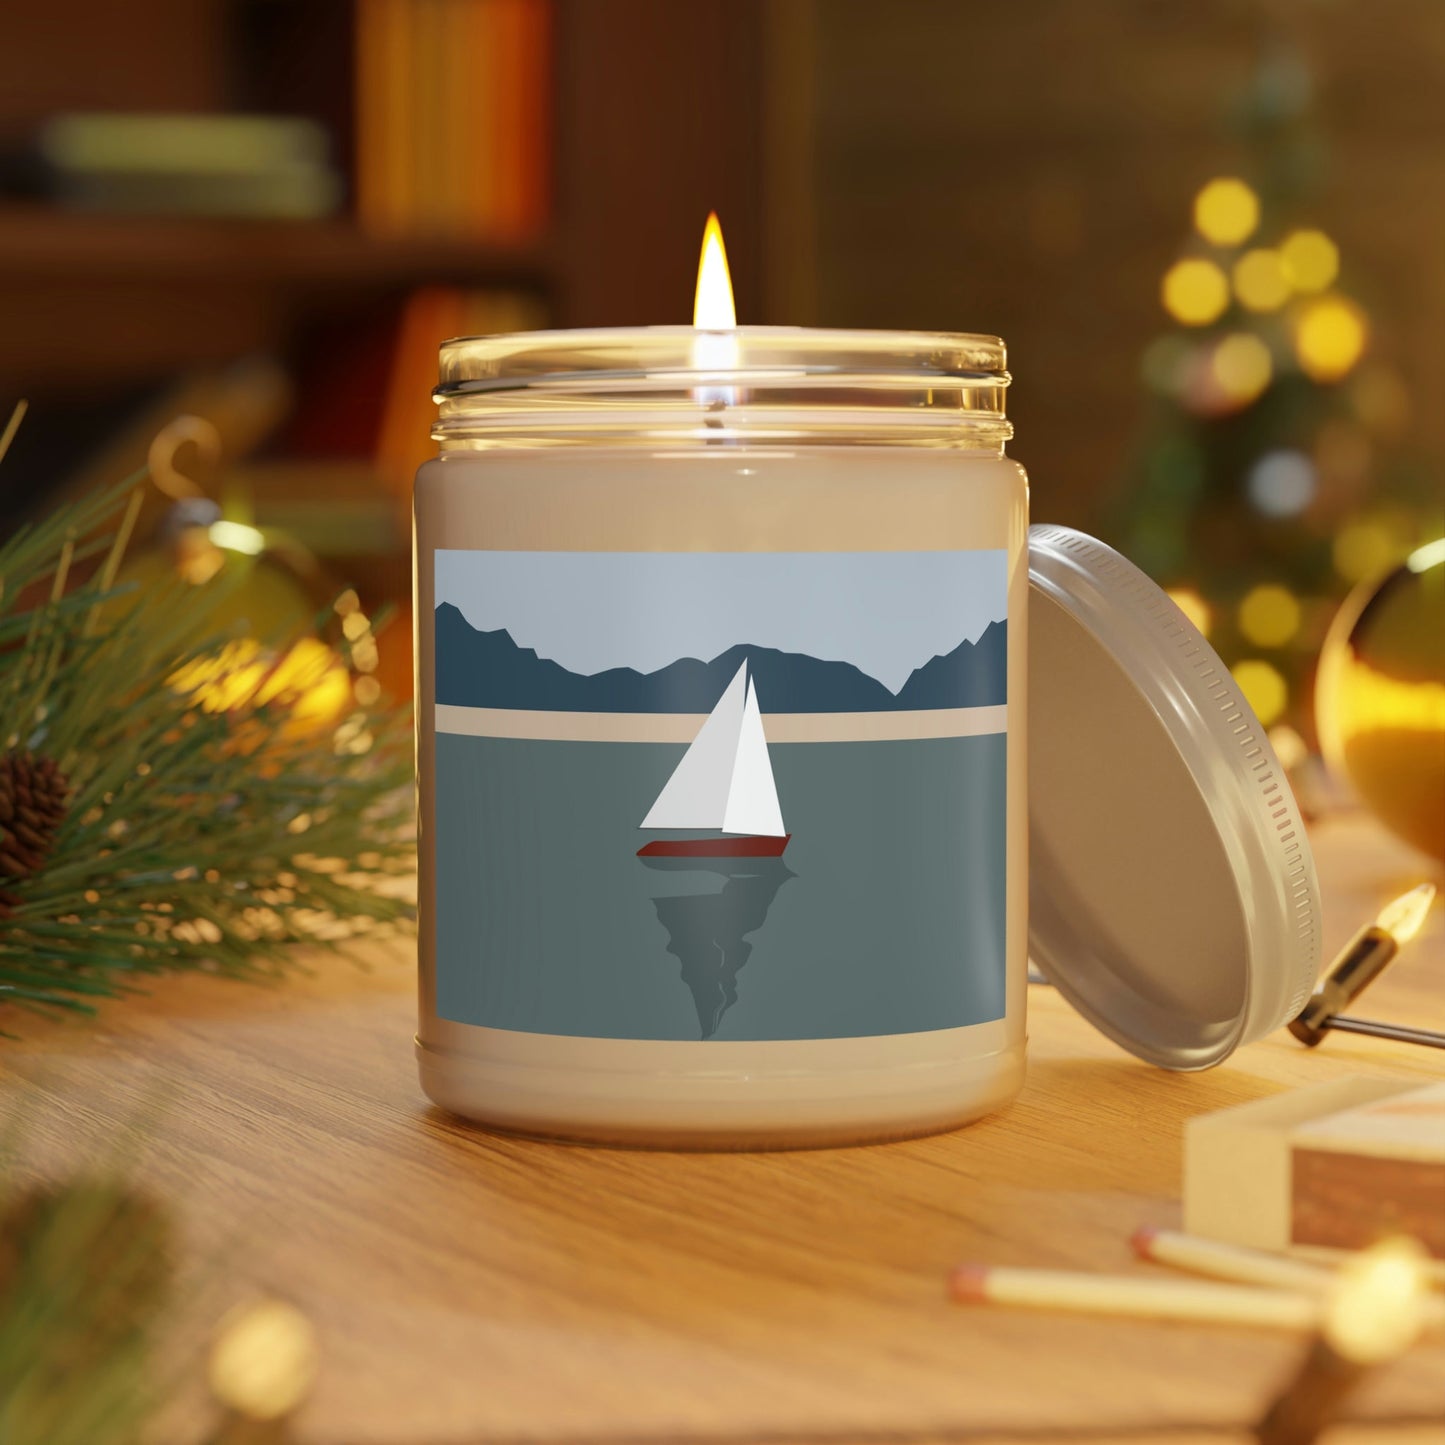 Sailboat Yacht Summertime Sea View Minimal Nature Art Candle Up to 60hSoy Wax 9oz Ichaku [Perfect Gifts Selection]